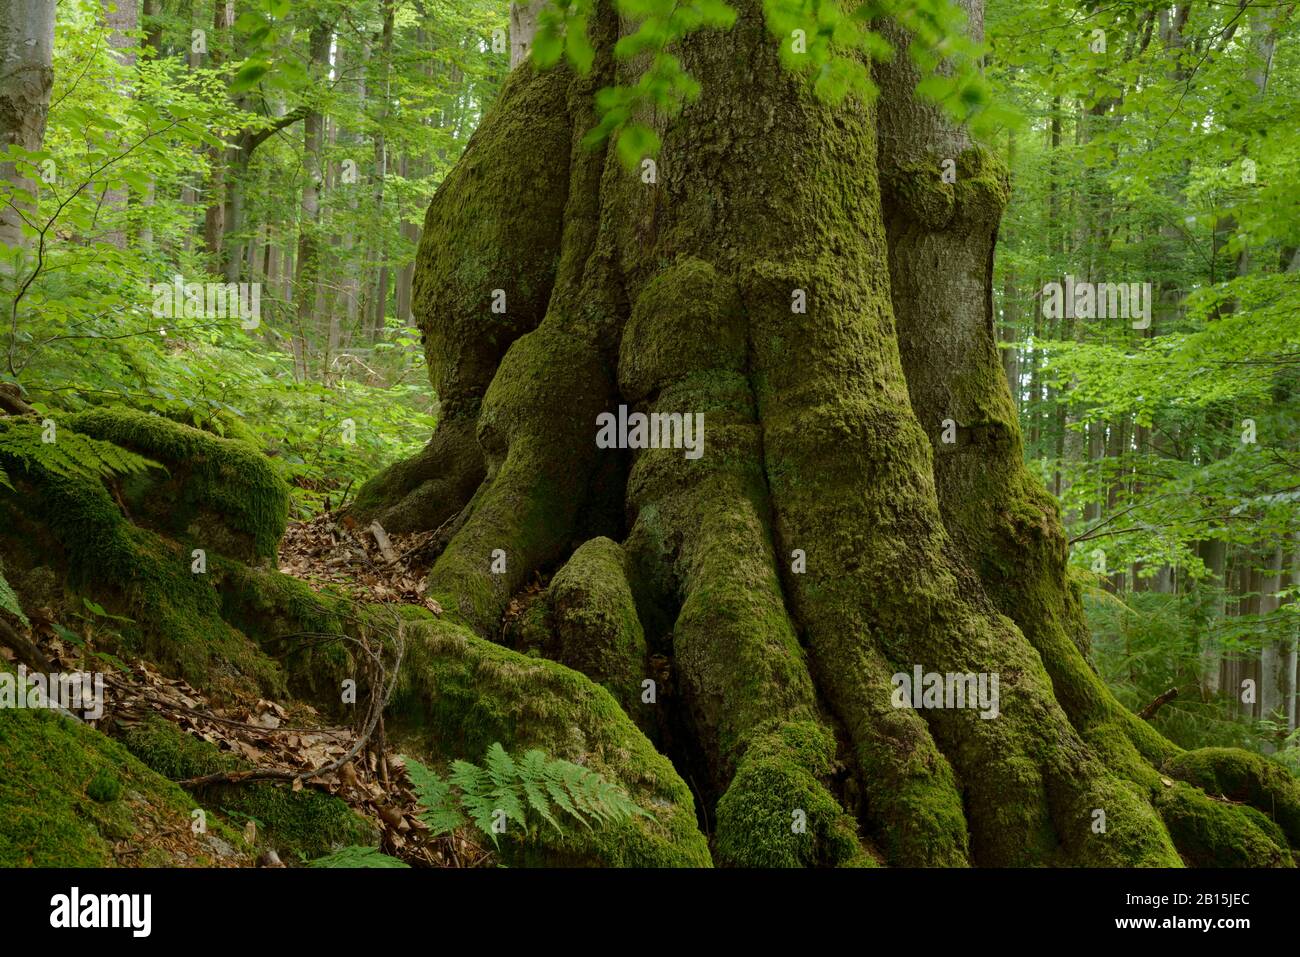 Bohemia / Czech Republic: Methuselah beech tree in one of the oldest primary forest reserves of Europe - 'Hojna Voda' - close to the Austrian border. Stock Photo